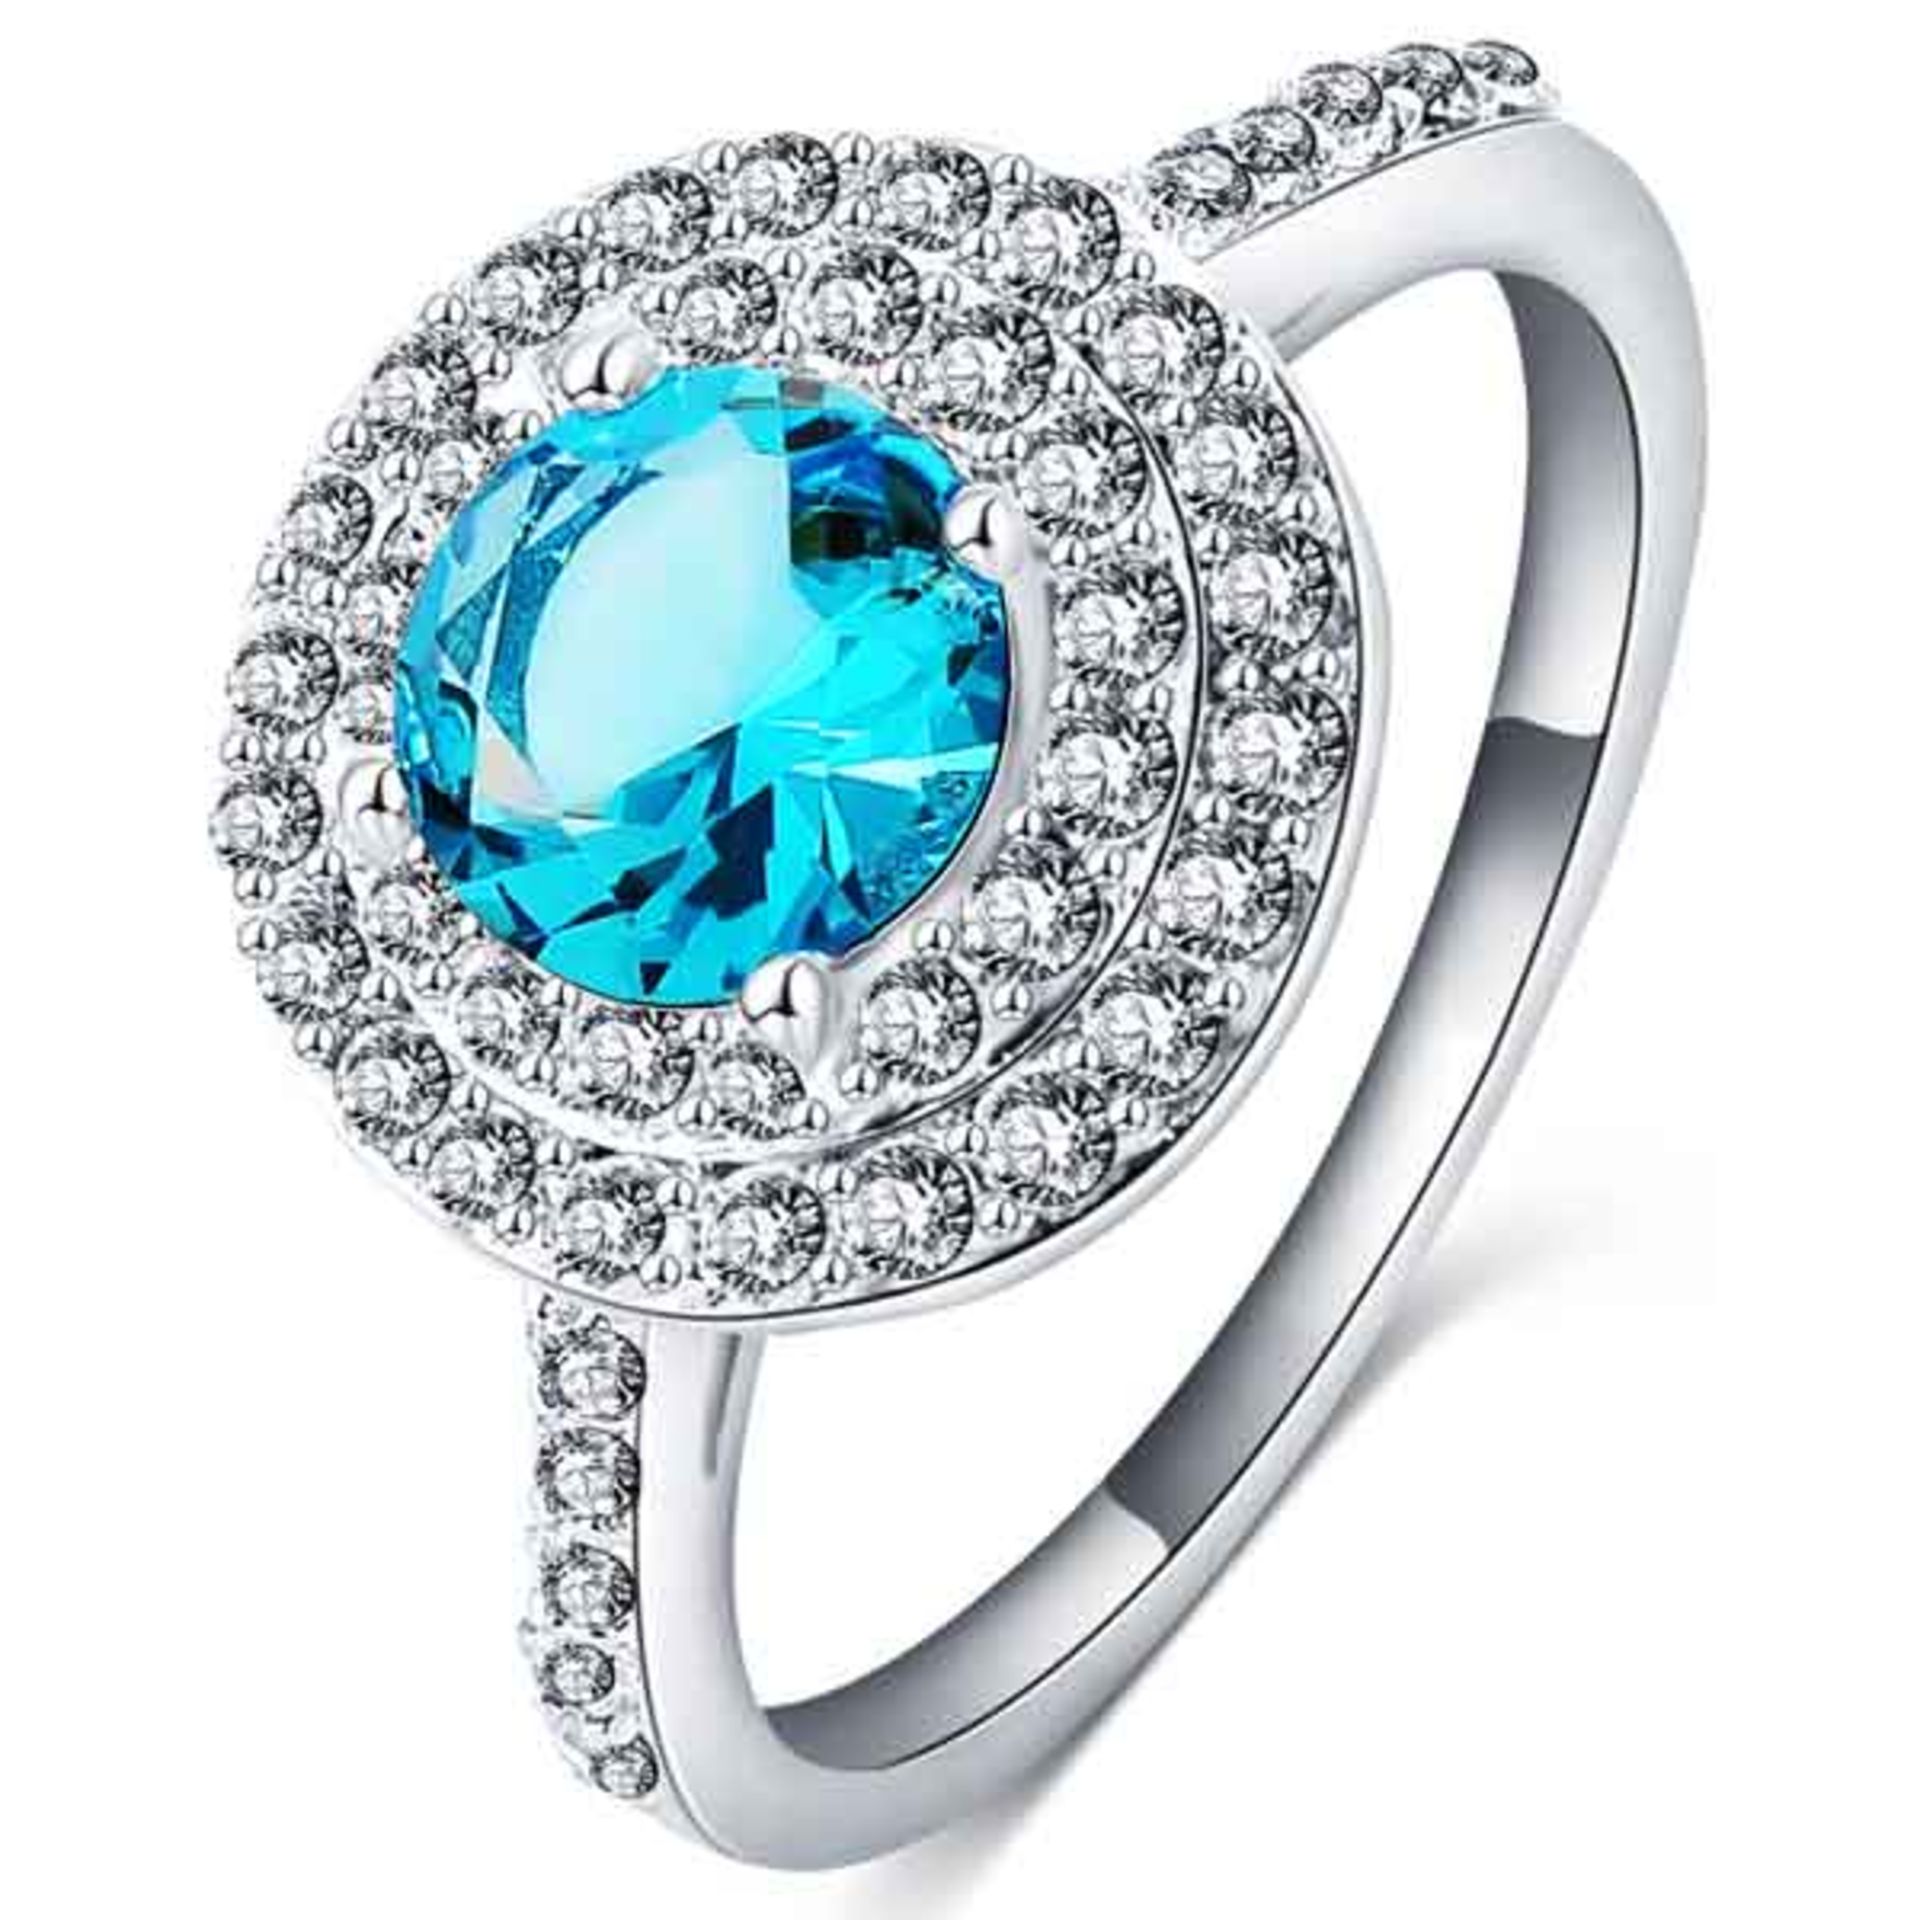 + VAT Brand New Platinum Plated Round Blue and White Stone Cocktail Ring